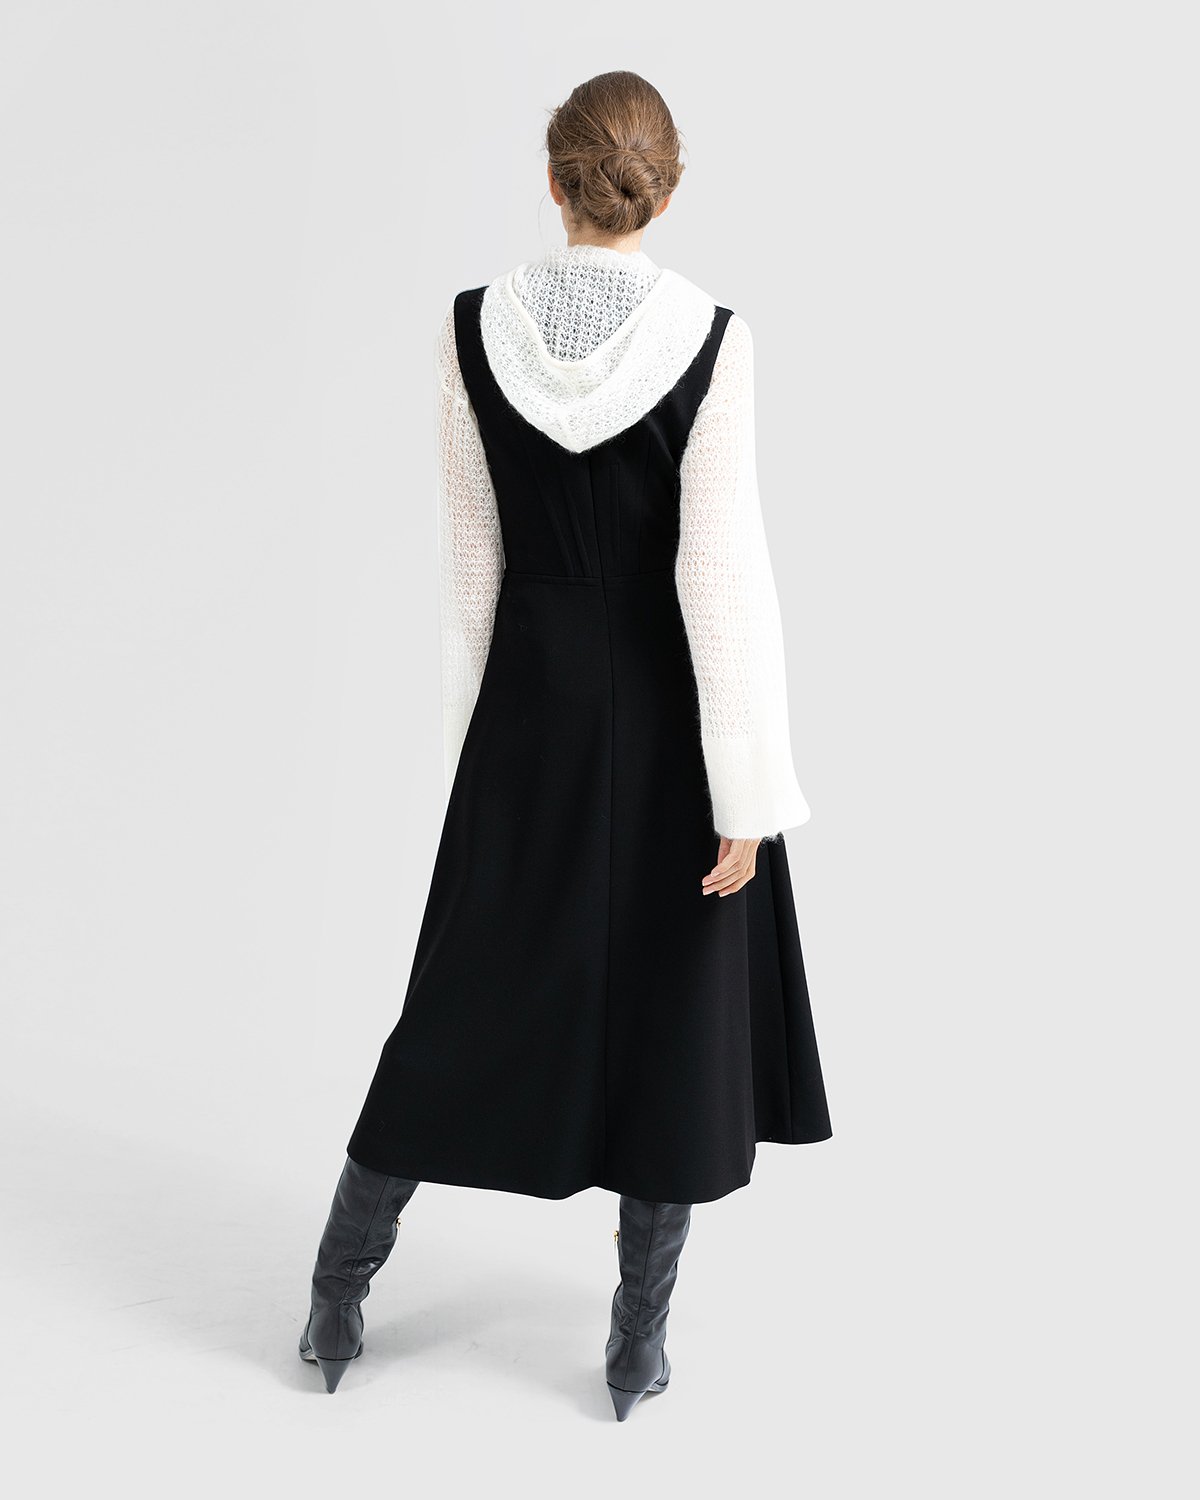 White Hooded mohair wool sweater | Sale, -50%, Private sale, -40% | Genny